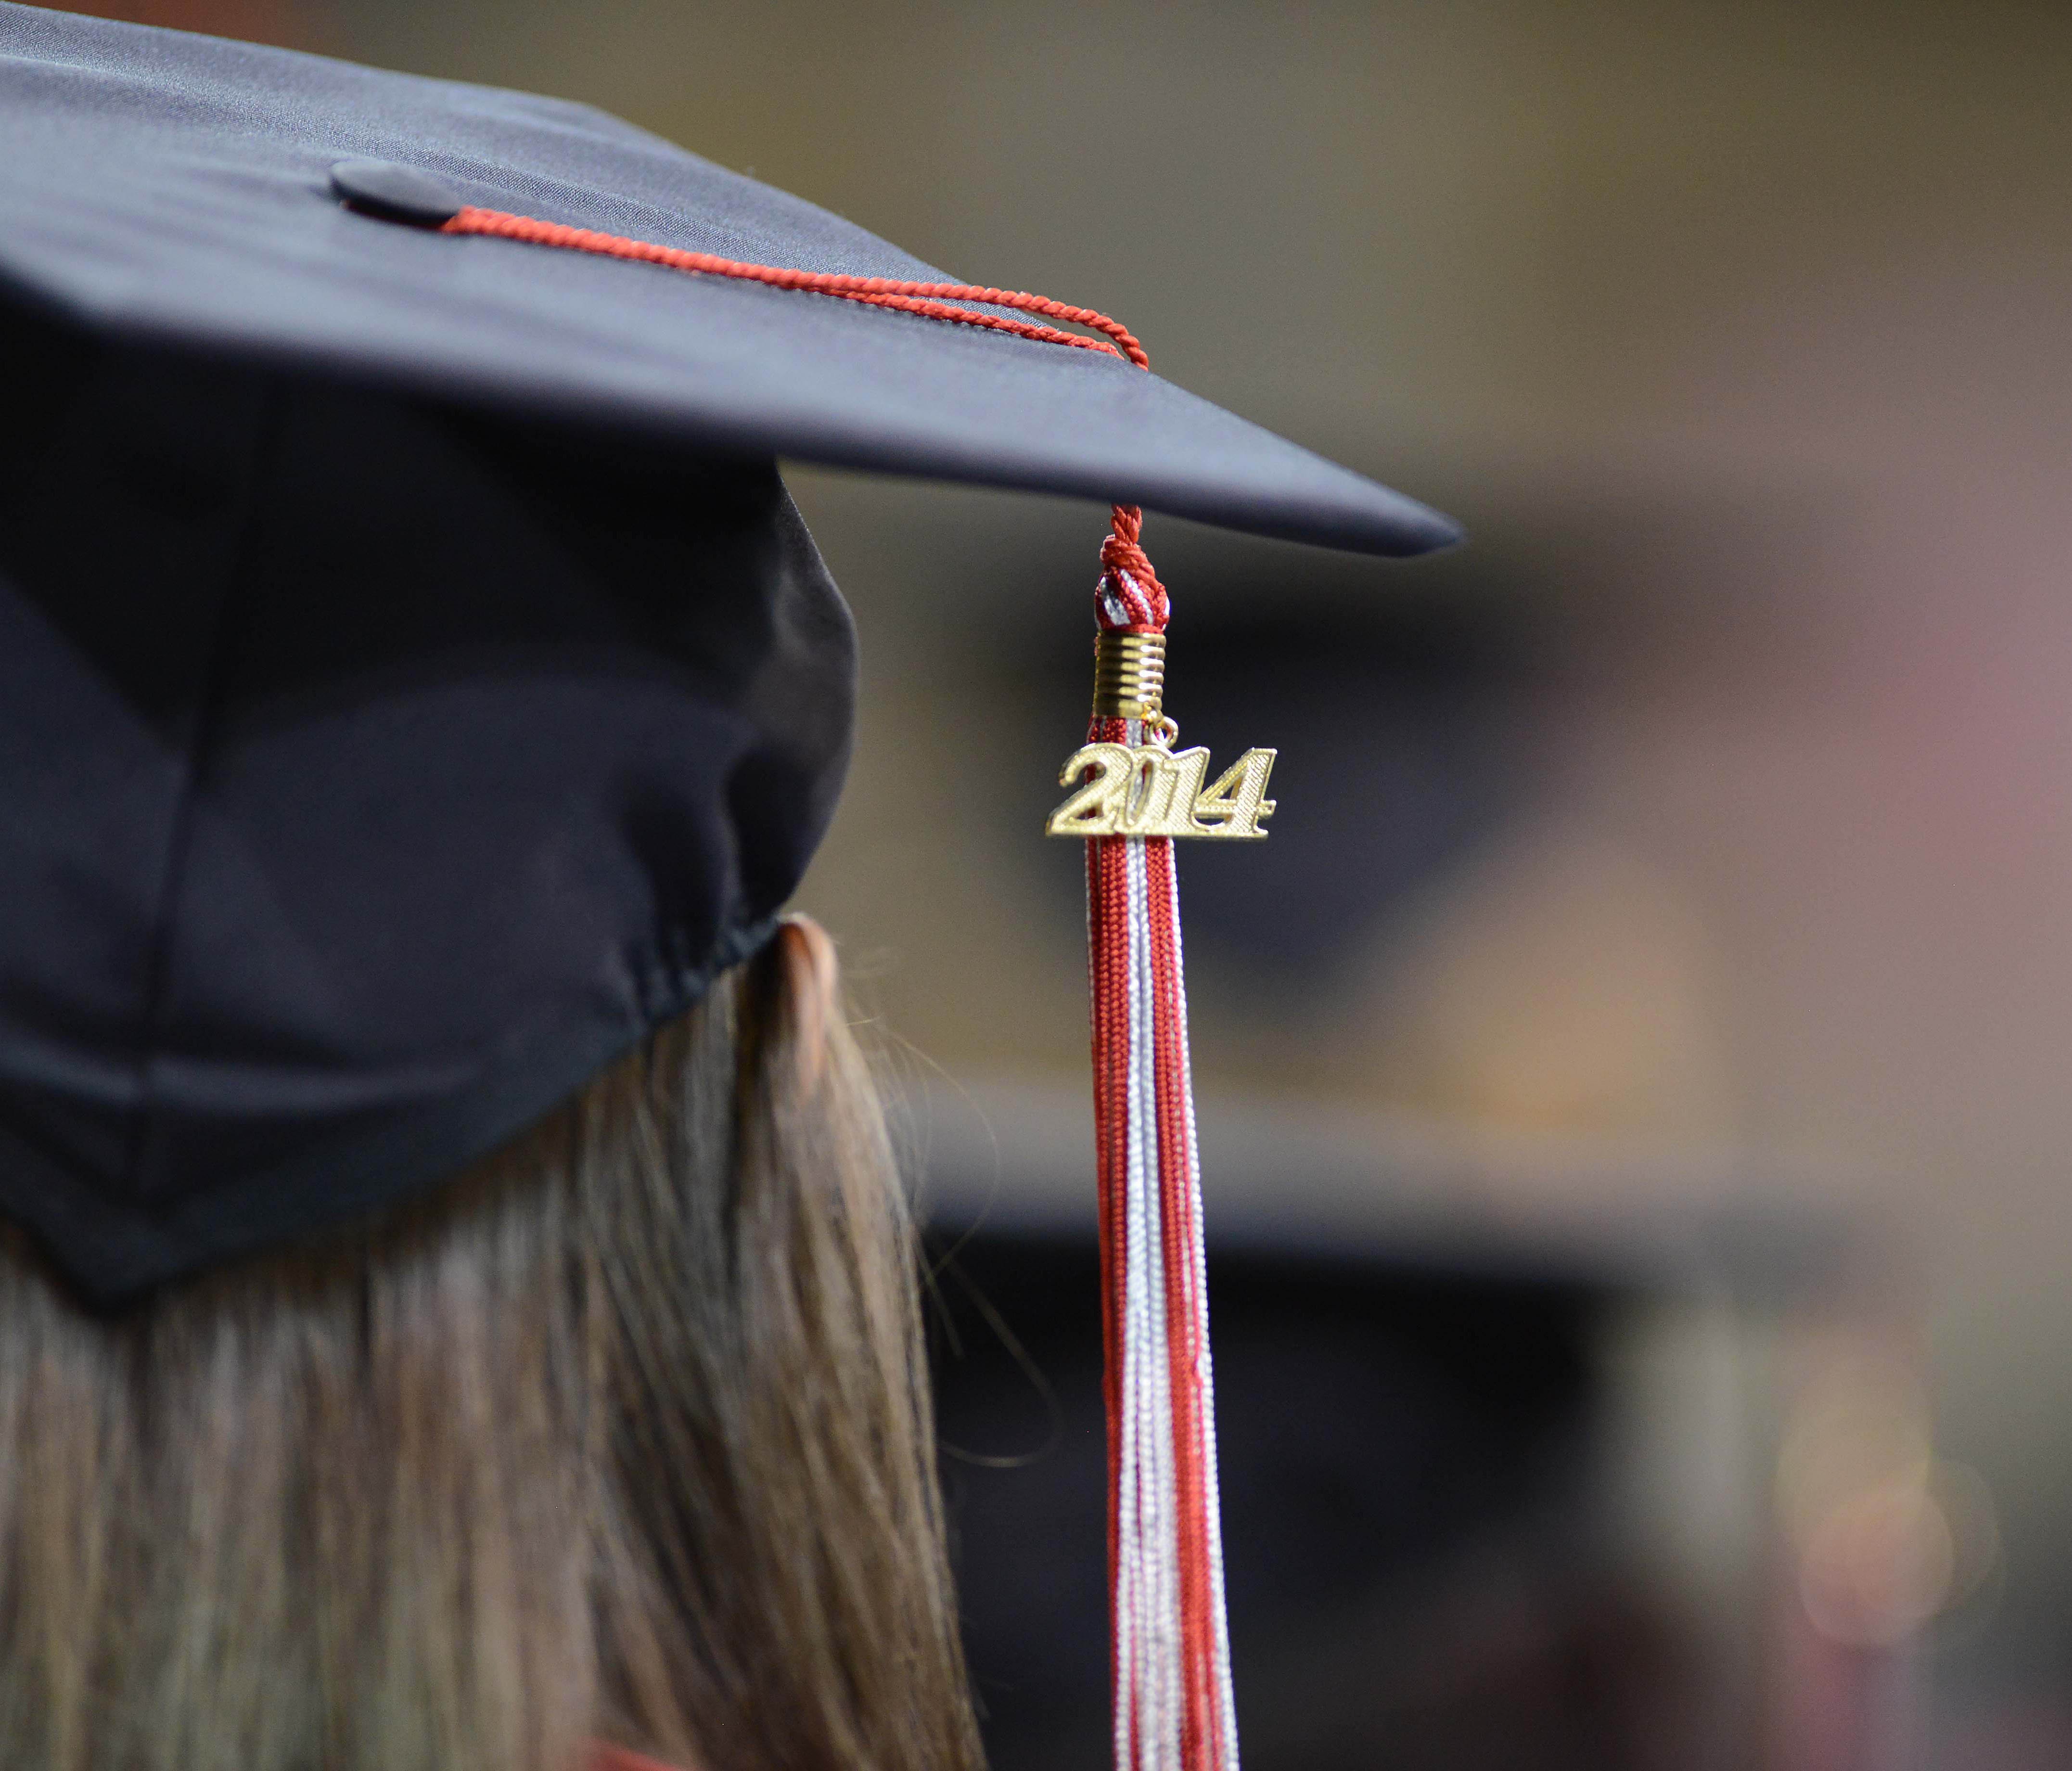 File photo taken in 2014 shows a graduate of Northwest Florida State College wears her graduation cap at the school's commencement ceremony in Niceville, Fla.